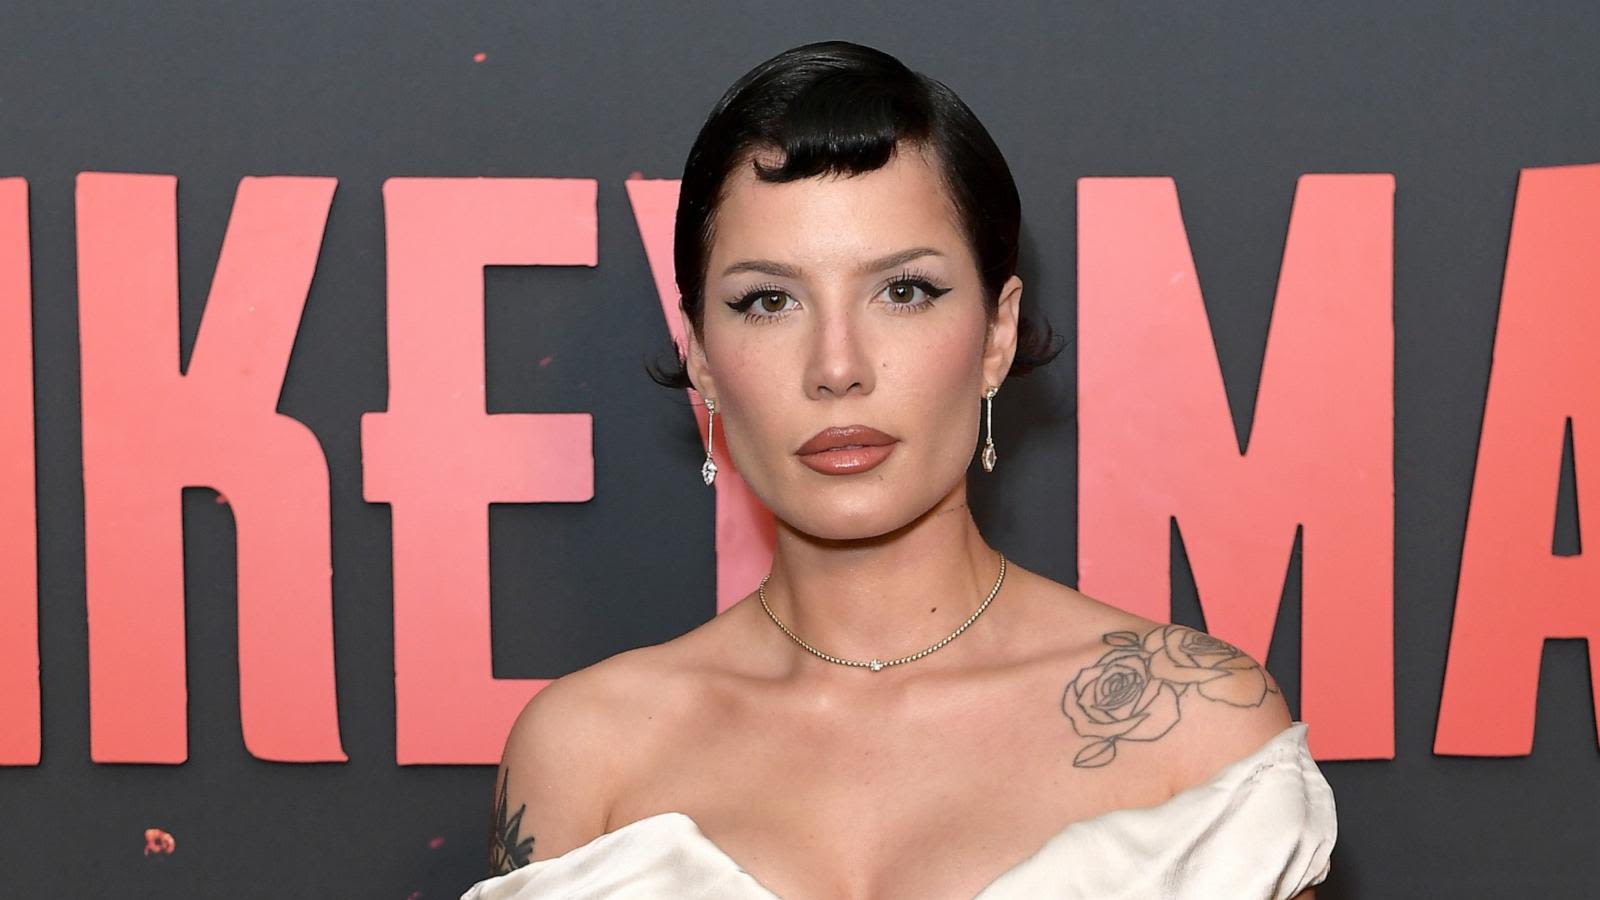 Halsey shares details on lupus, 'rare' disorder in emotional Instagram post